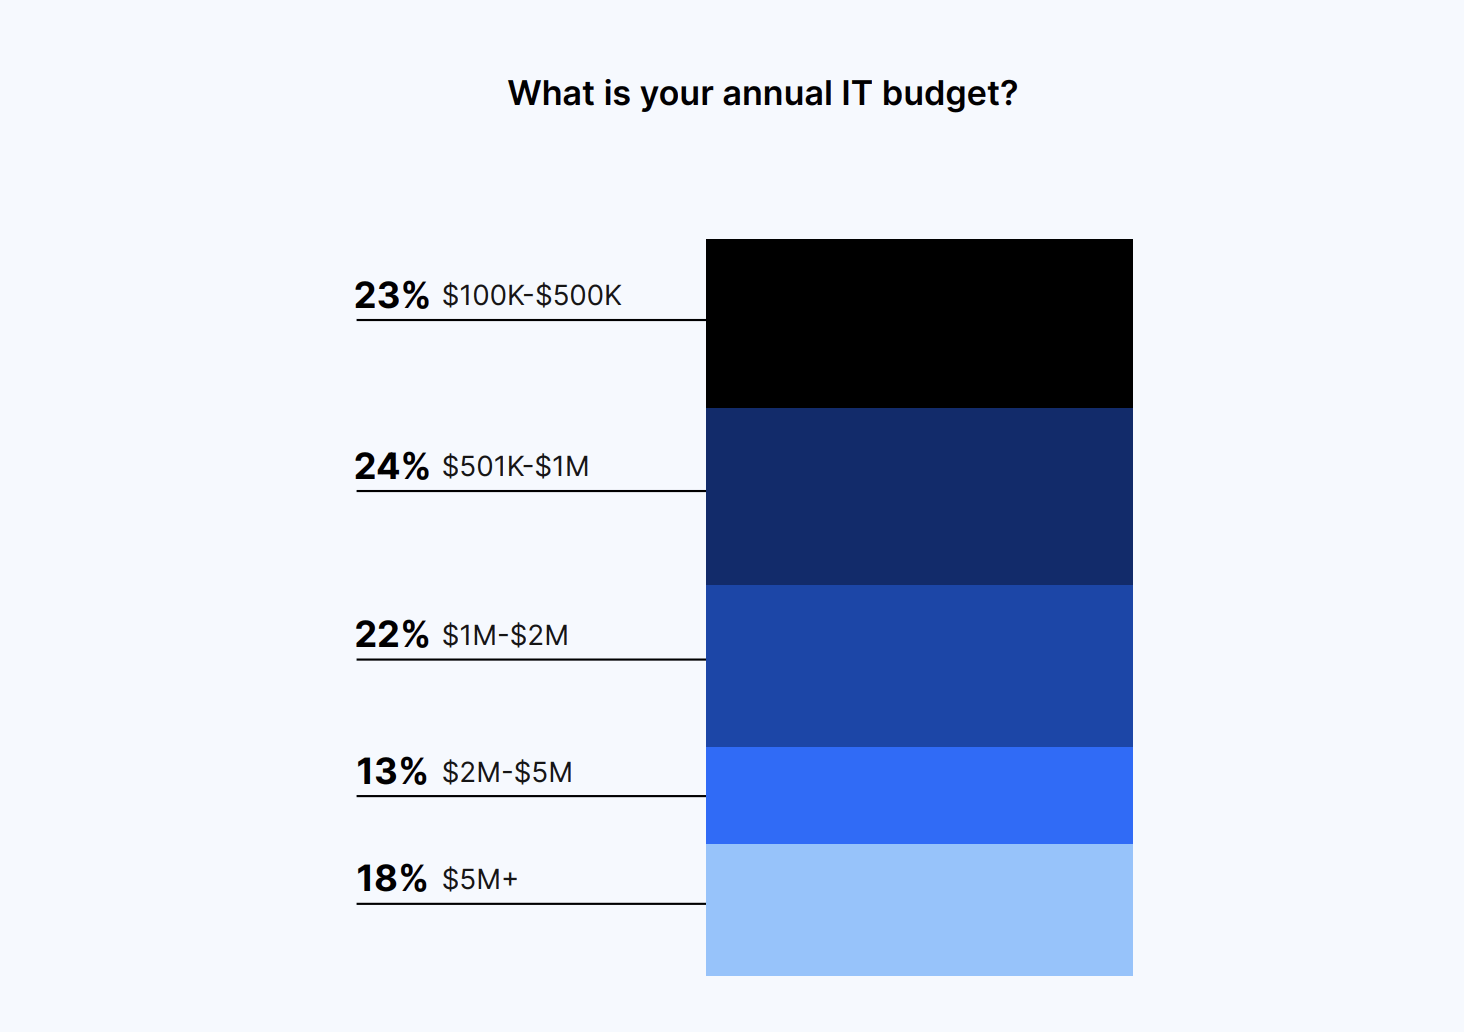 What's your annual IT budget?